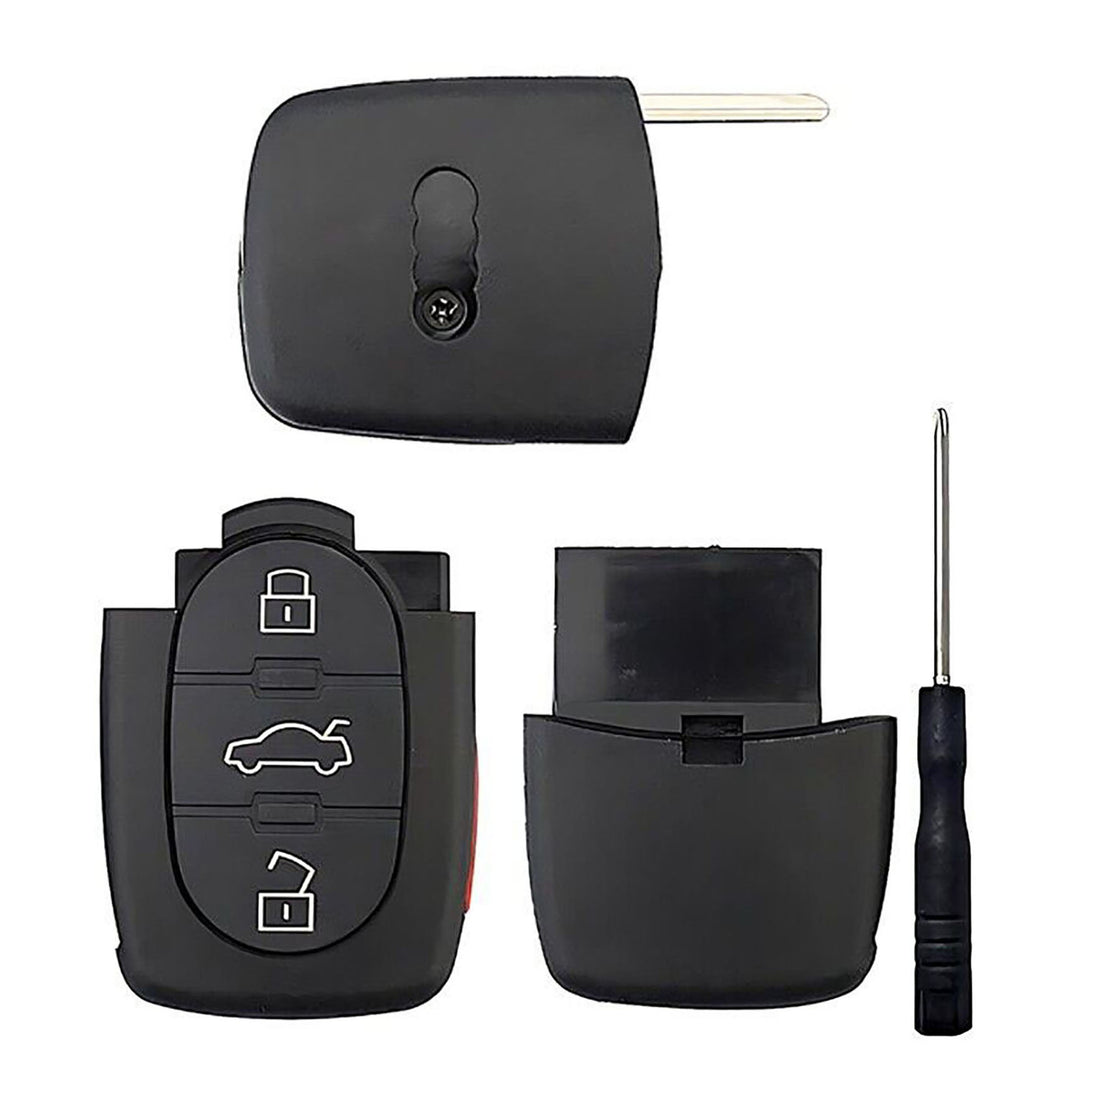 1x New Quality Replacement Key Fob Remote SHELL / CASE Compatible with & Fit For Audi Vehicles - MPN MYT8Z0837231-04 (NO electronics or Chip inside)